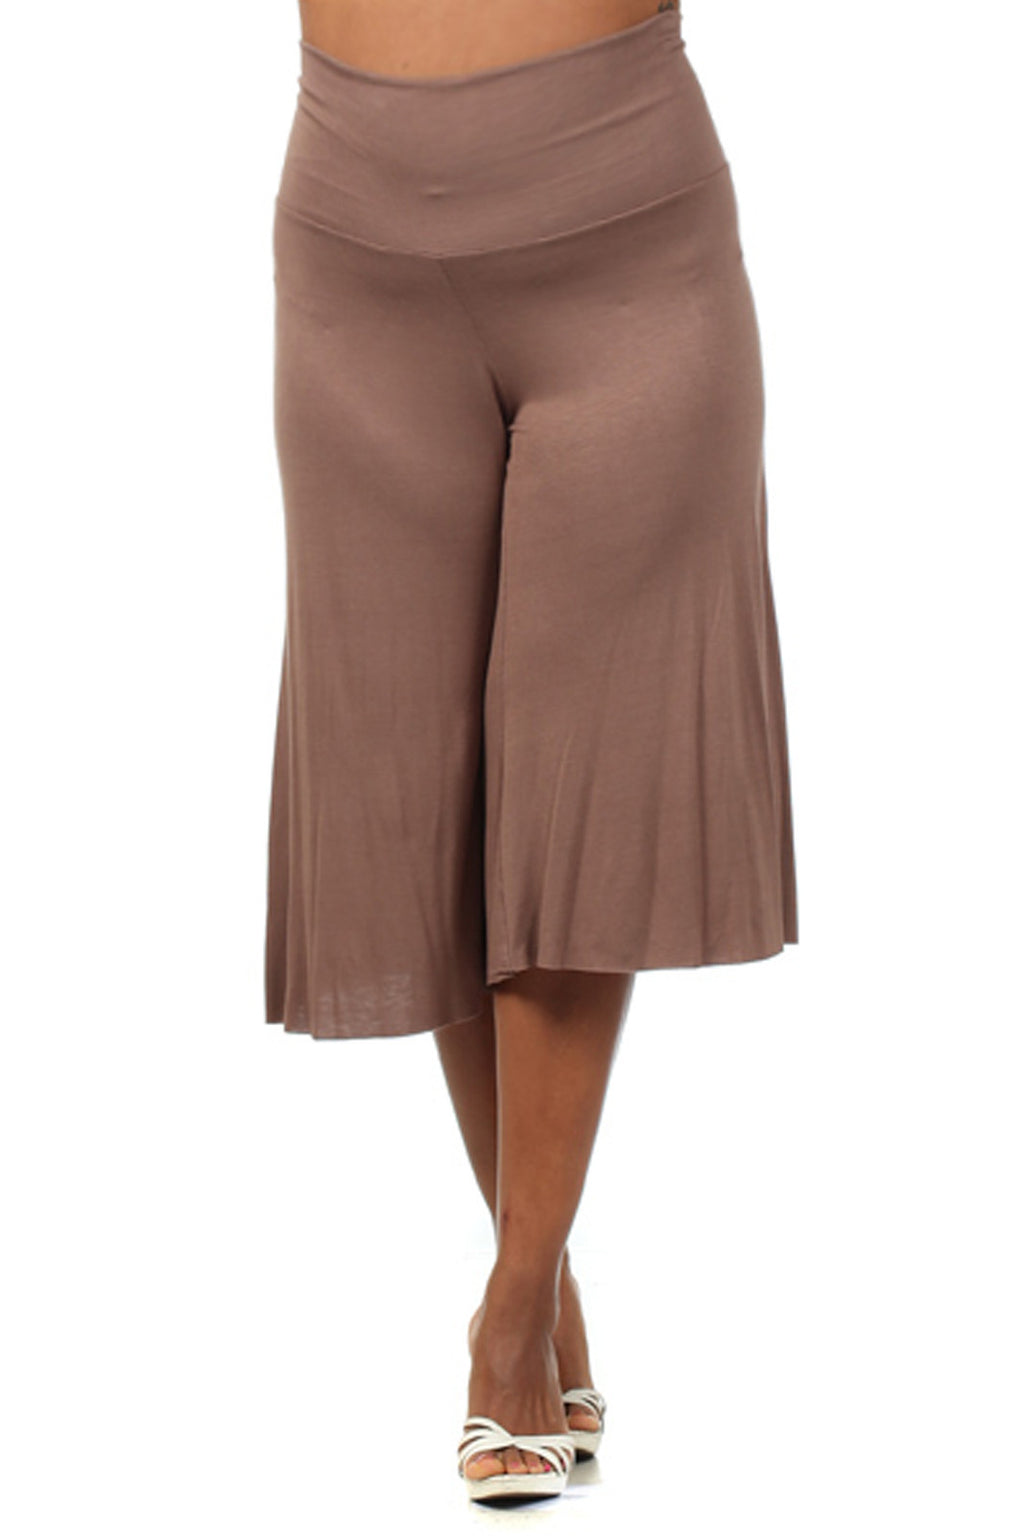 Plus Size Gaucho Pants - Mommylicious